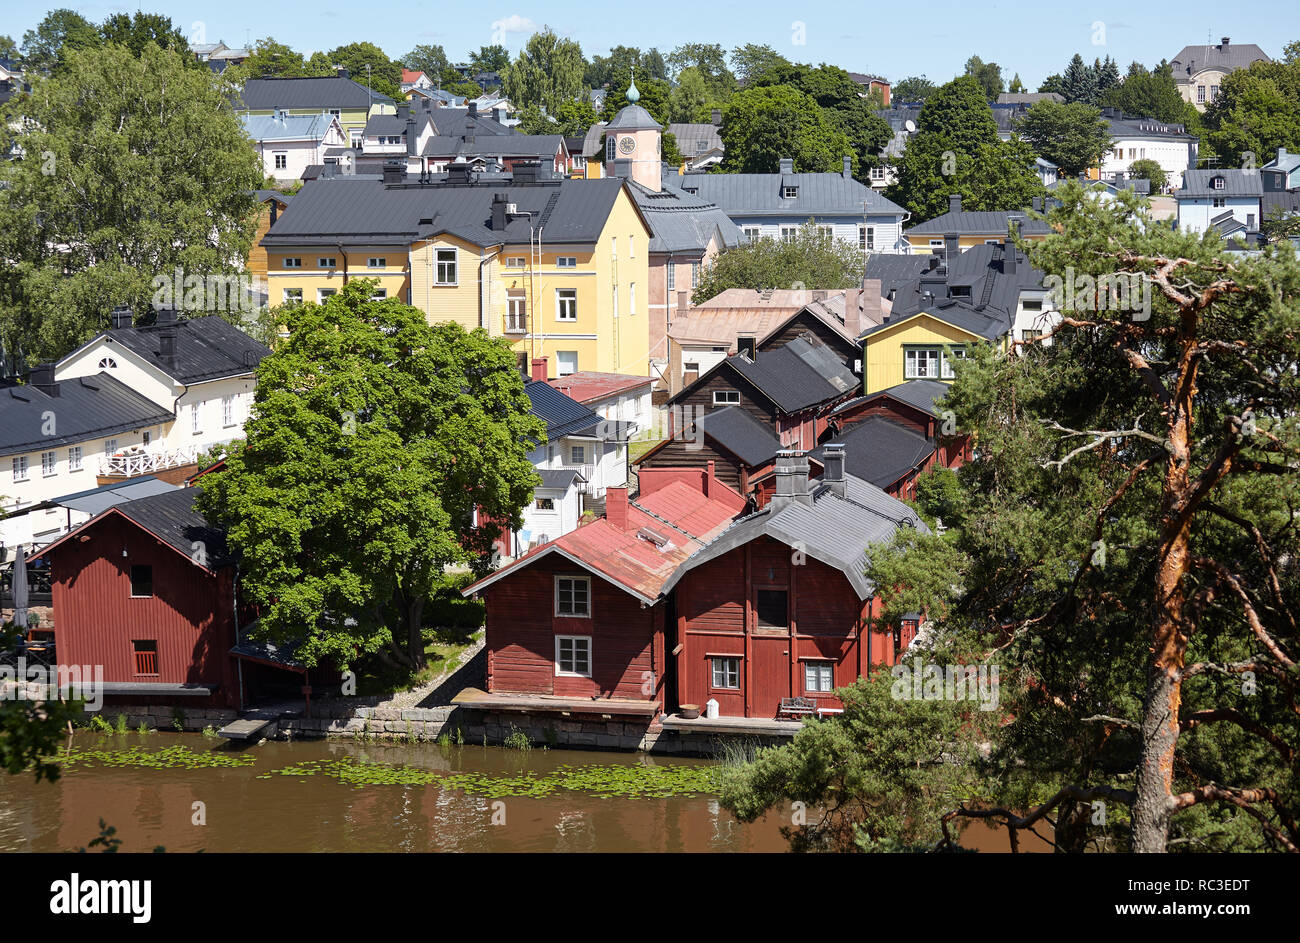 Porvoo, Finland - July 16, 2017: View to the river Porvoonjoki in the center of town. The red-colored wooden storage buildings on the riverside are a  Stock Photo